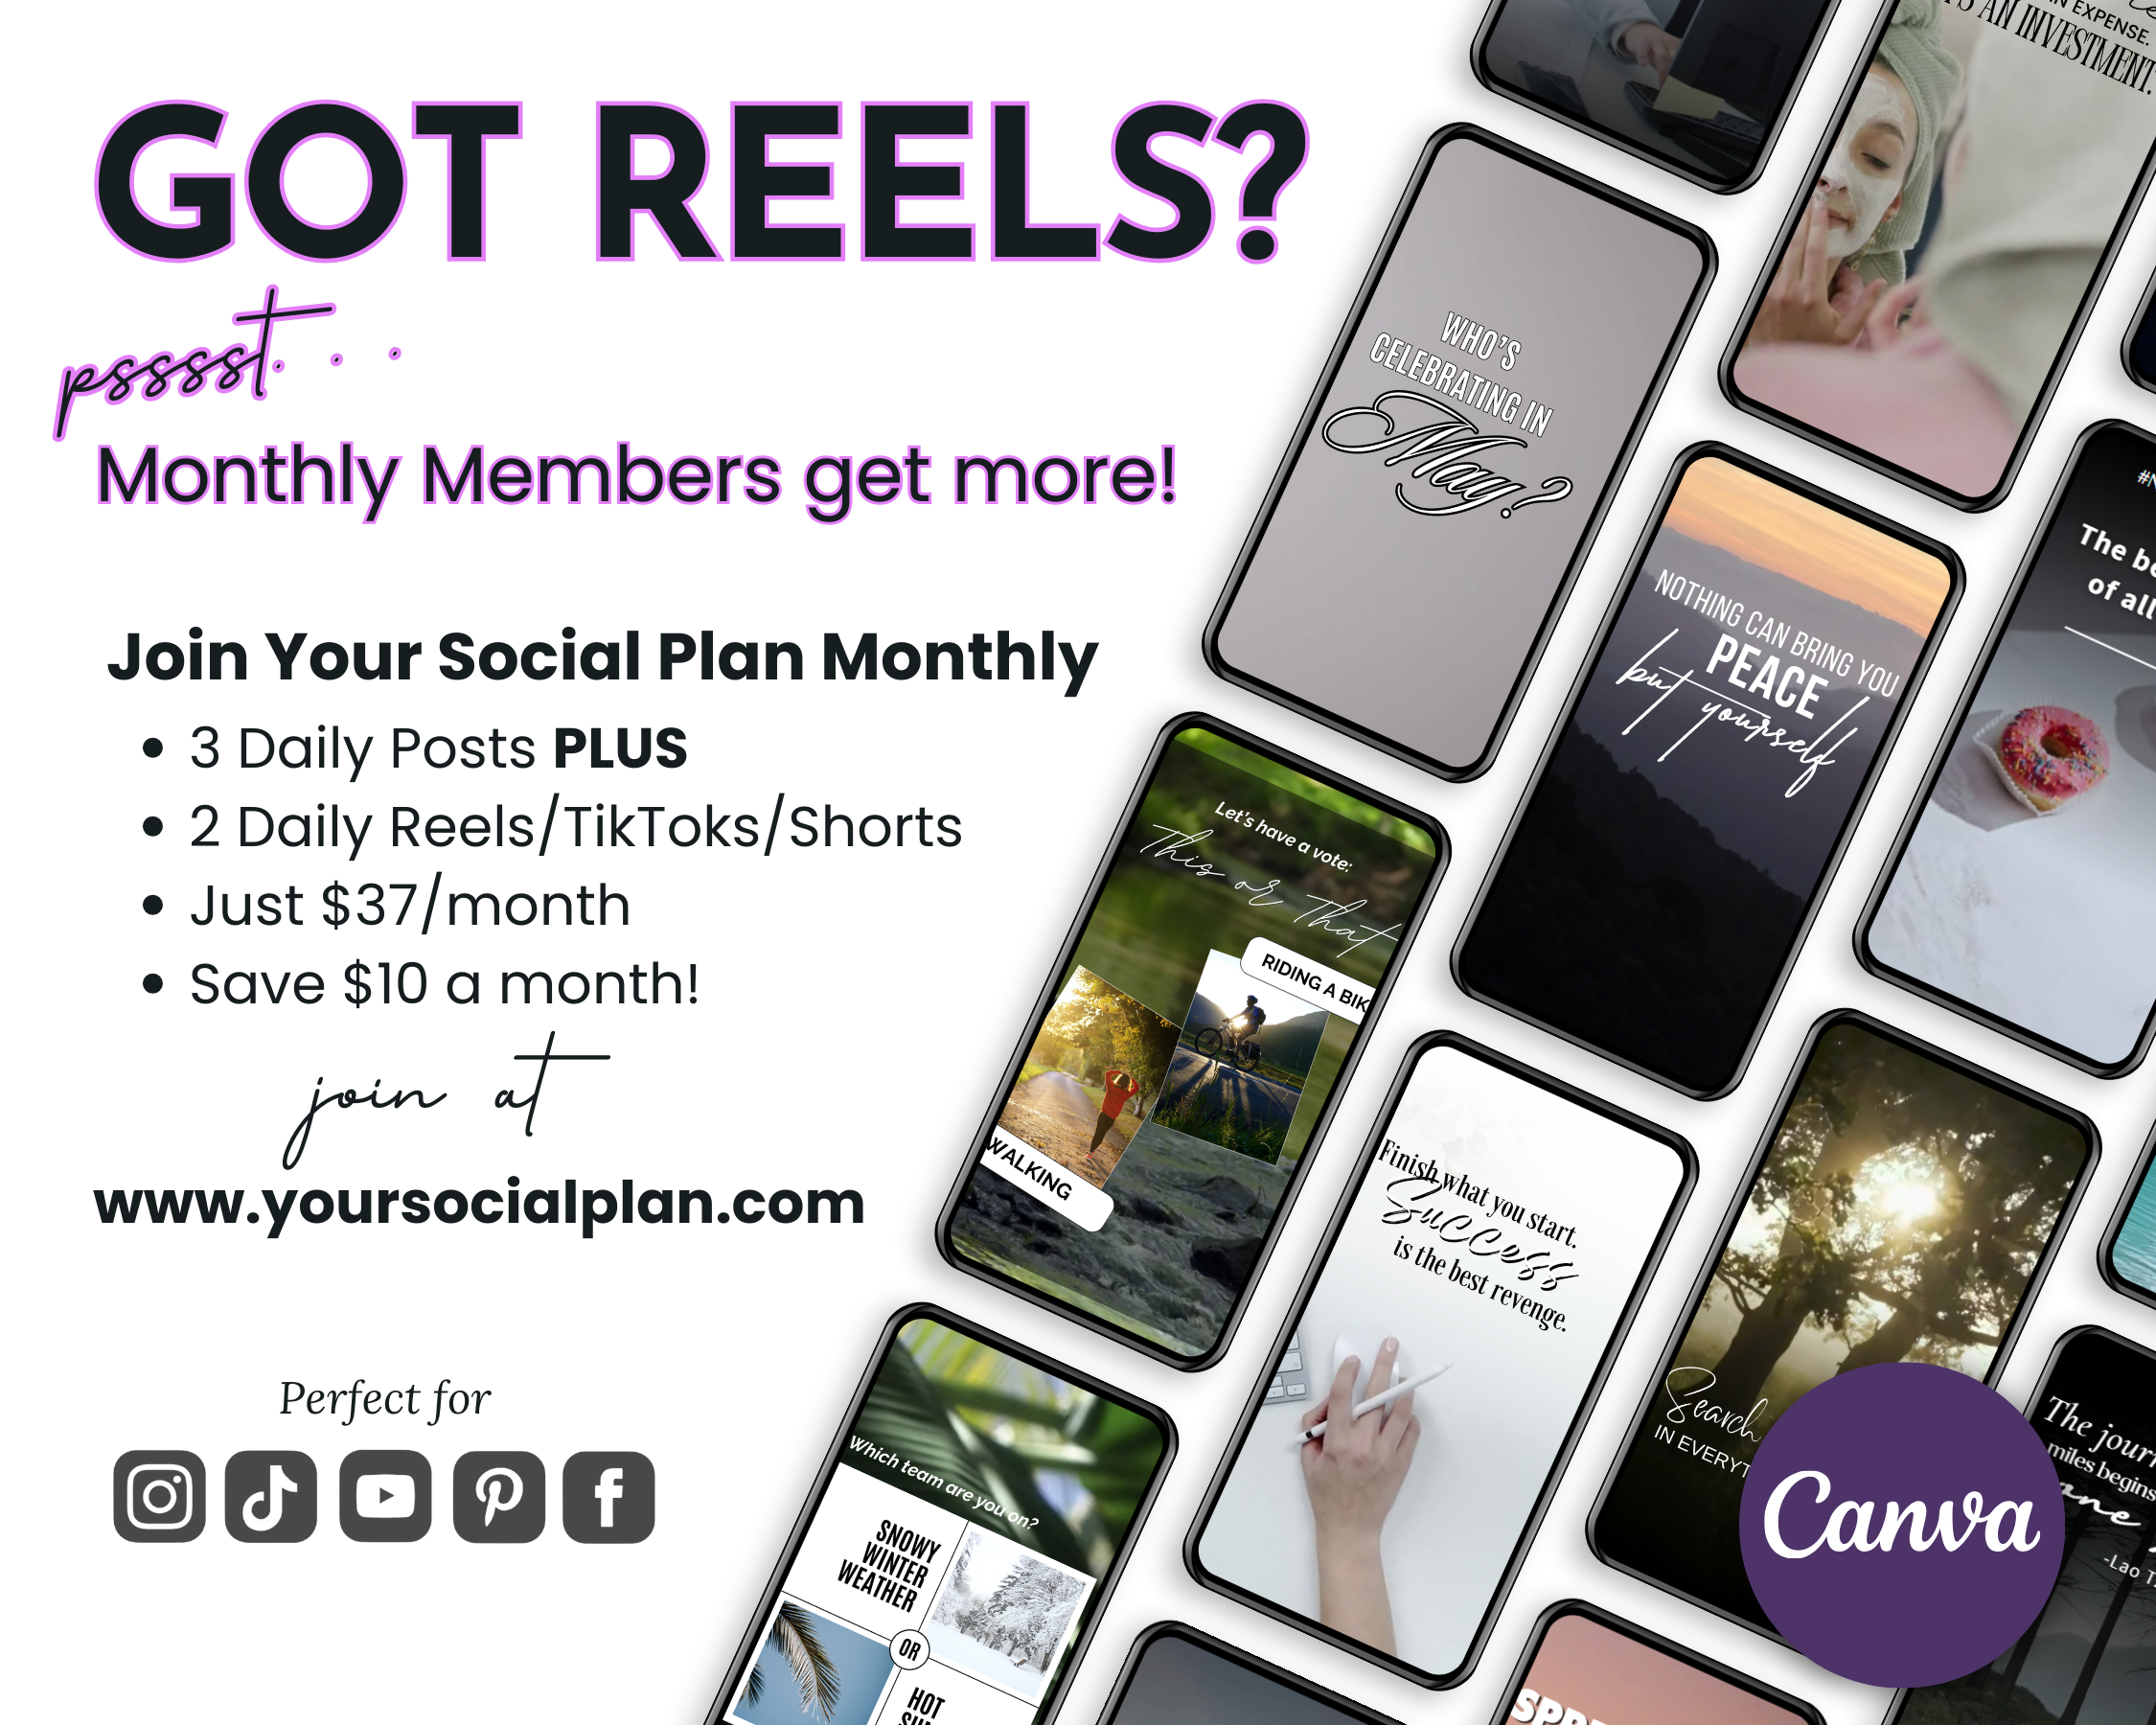 Promotional image for "May Daily Posting Plan" featuring membership benefits for social media content creation, including daily posting plans and smartphones displaying various posts, with the Get Socially Inclined logo in the corner.